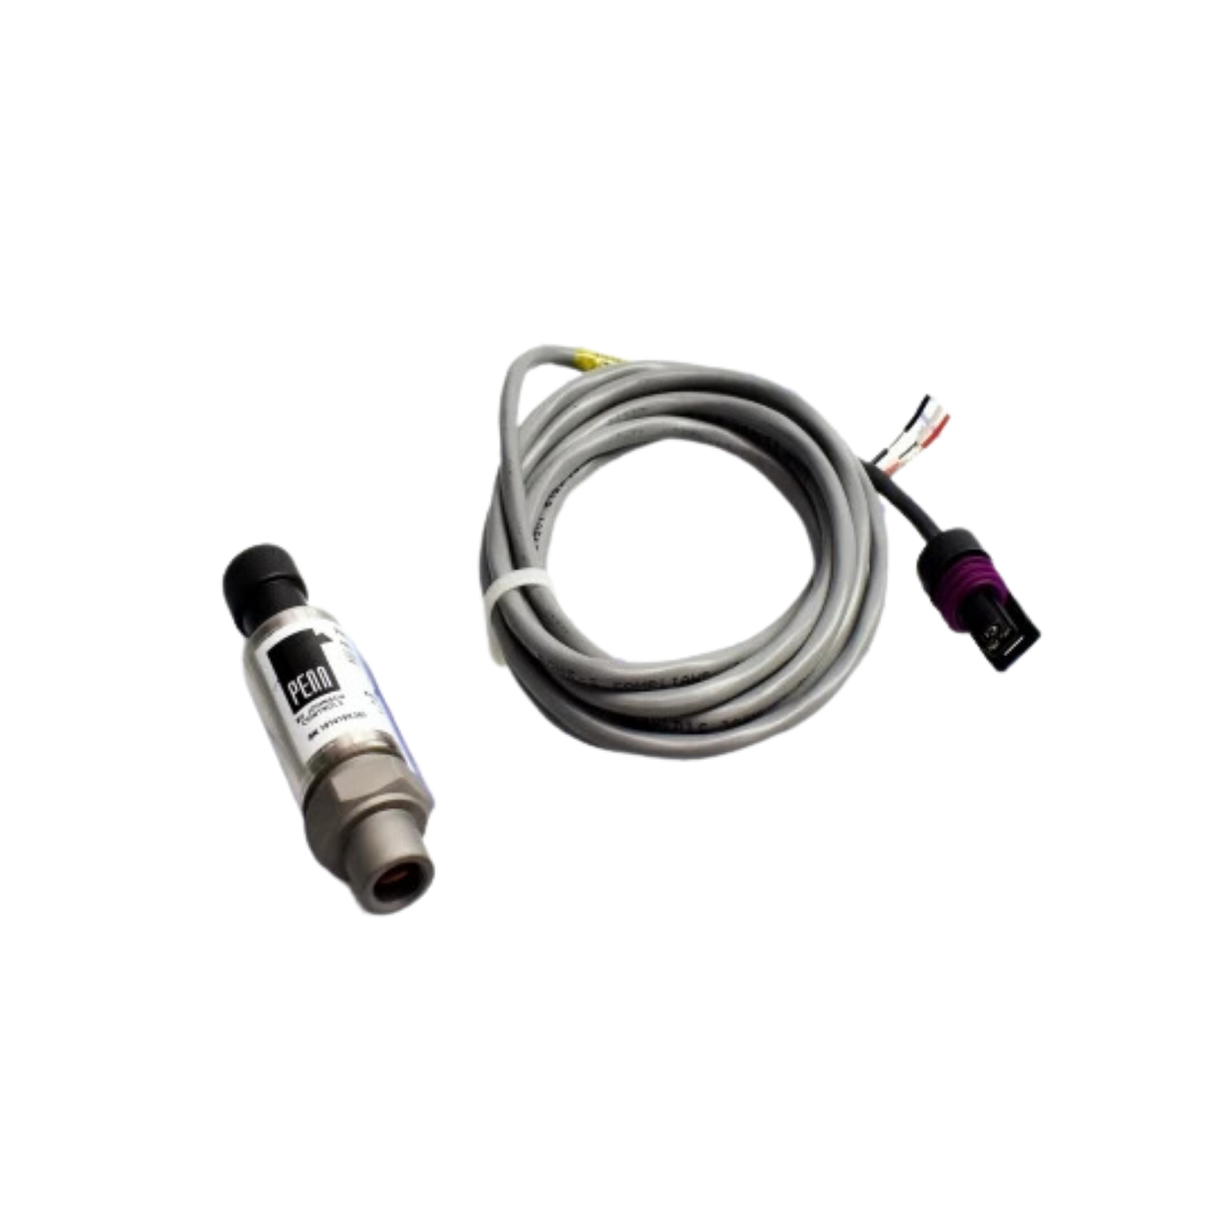 Johnson Controls P499VCP-105K 0 - 500PSI Pressure Range, Pressure Transducer with 6.6' Wiring Harness and Packard Electrical Connection